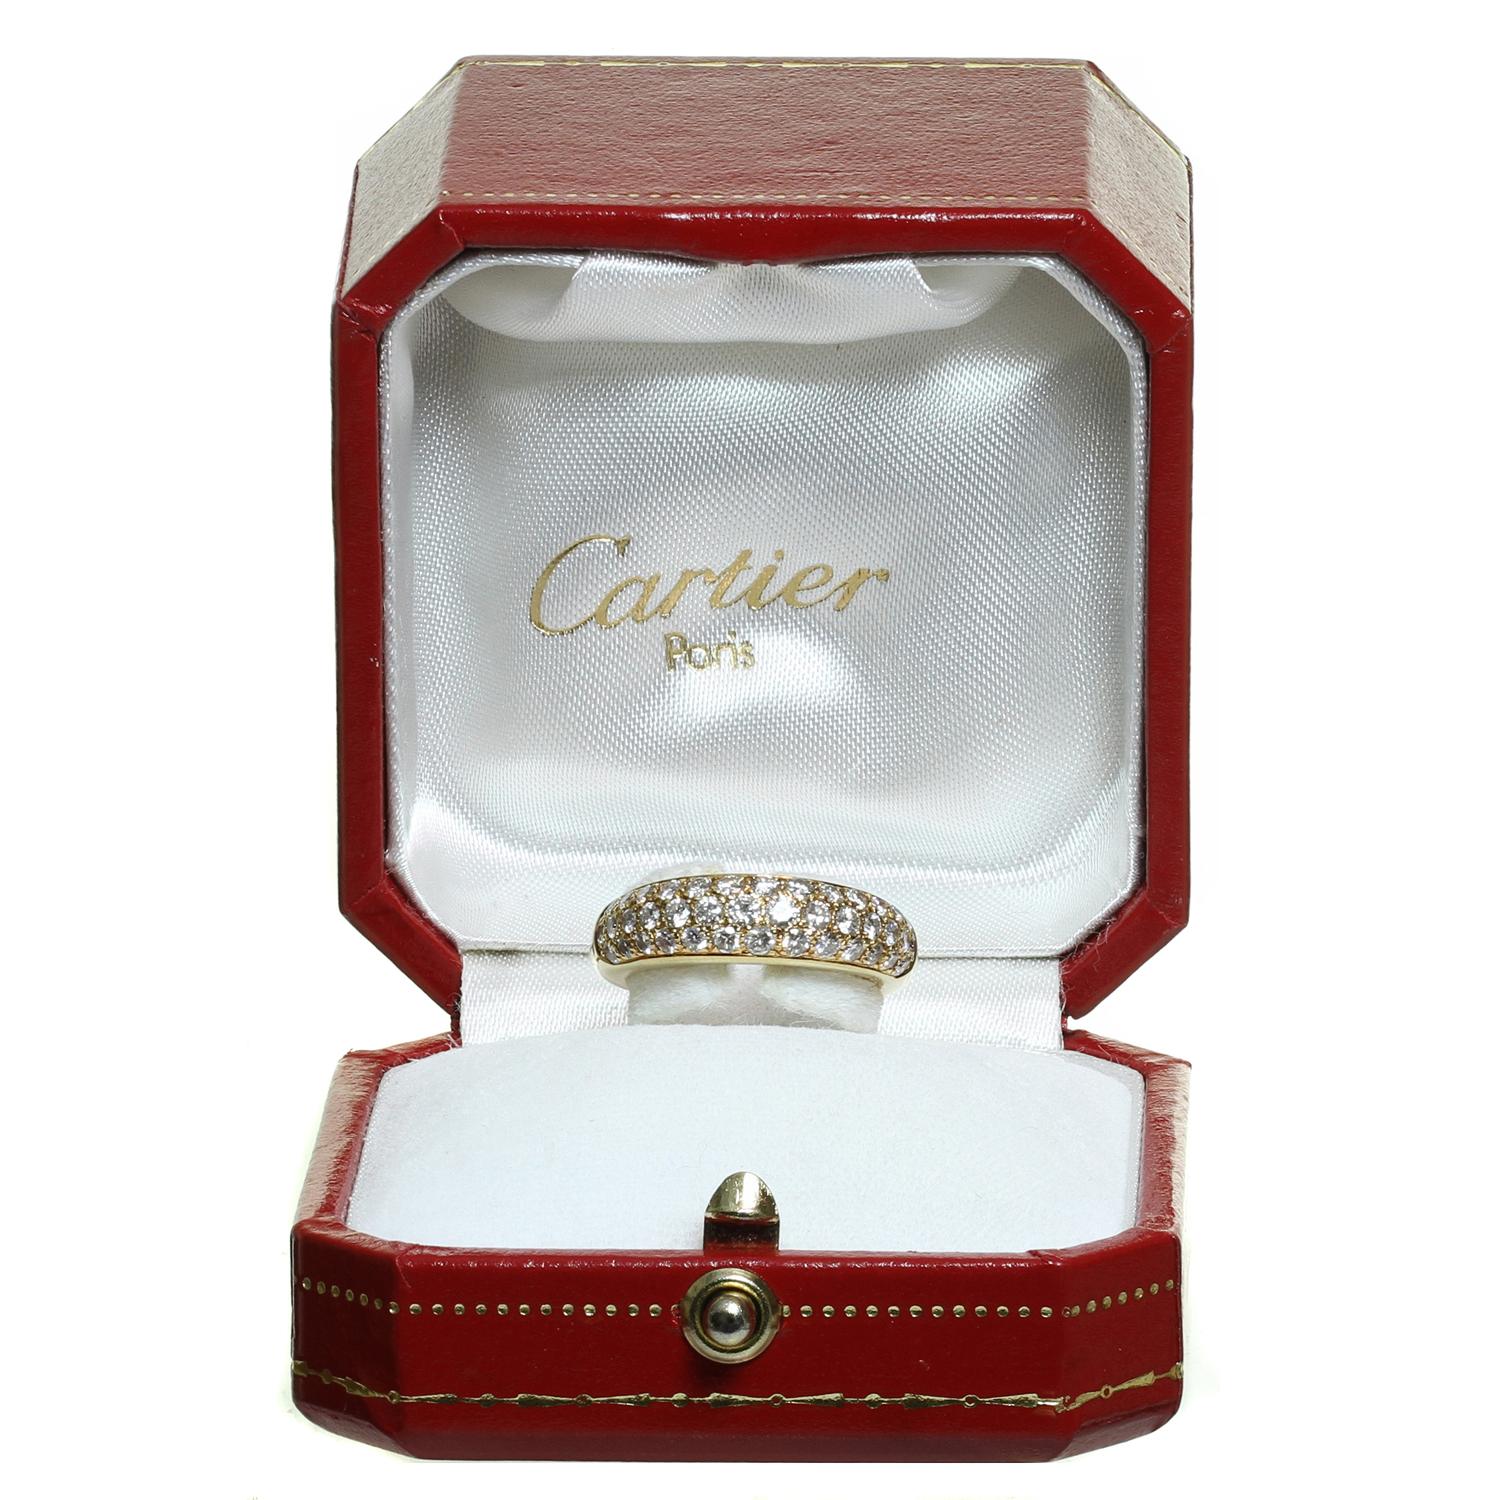 This classic Cartier ring is crafted in 18k yellow gold and pave-set with brilliant-cut round D-F VVS1-VVS2 diamonds weighing an estimated 1.10 carats. Made in France circa 1993. Measurements: 0.23